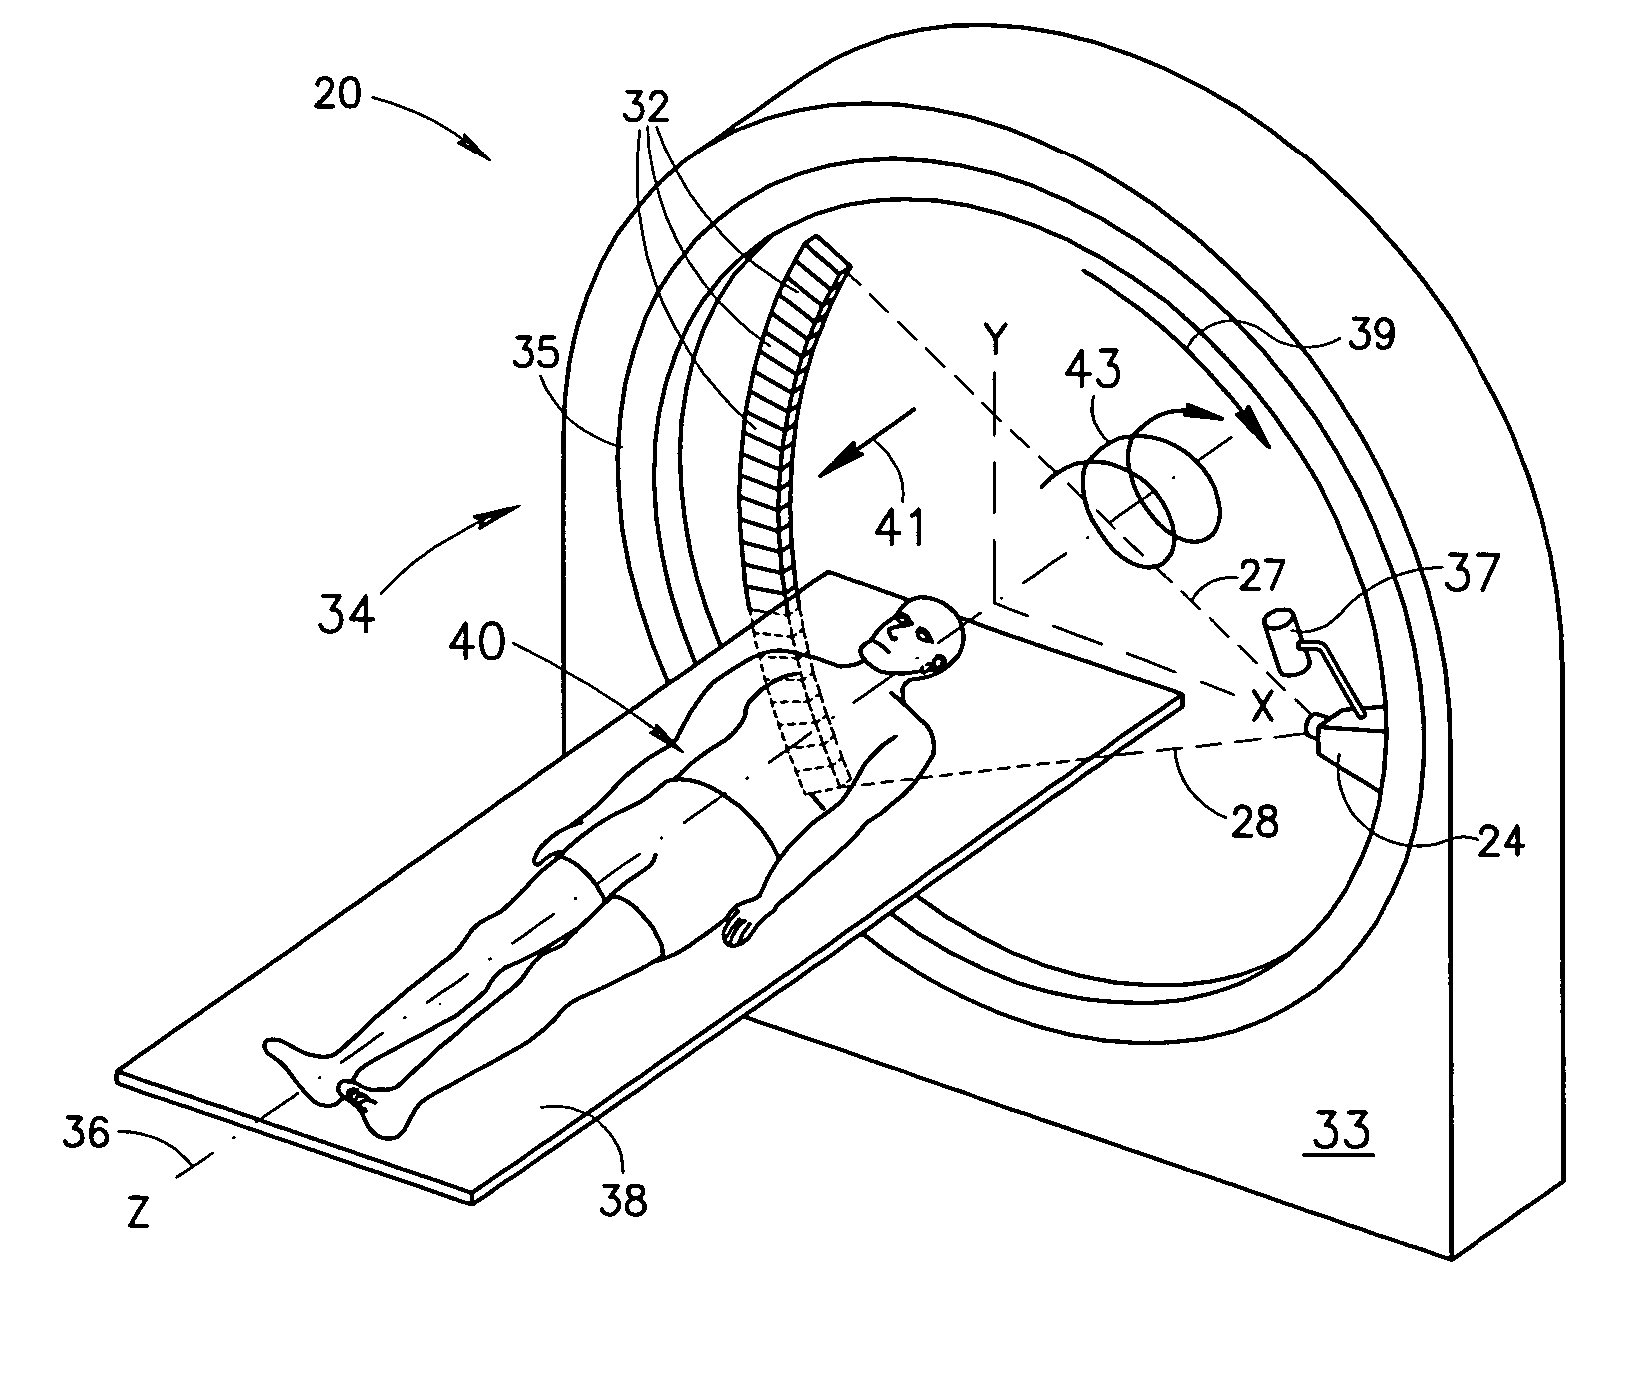 Method and apparatus for calibrating X-ray detectors in a CT-imaging system